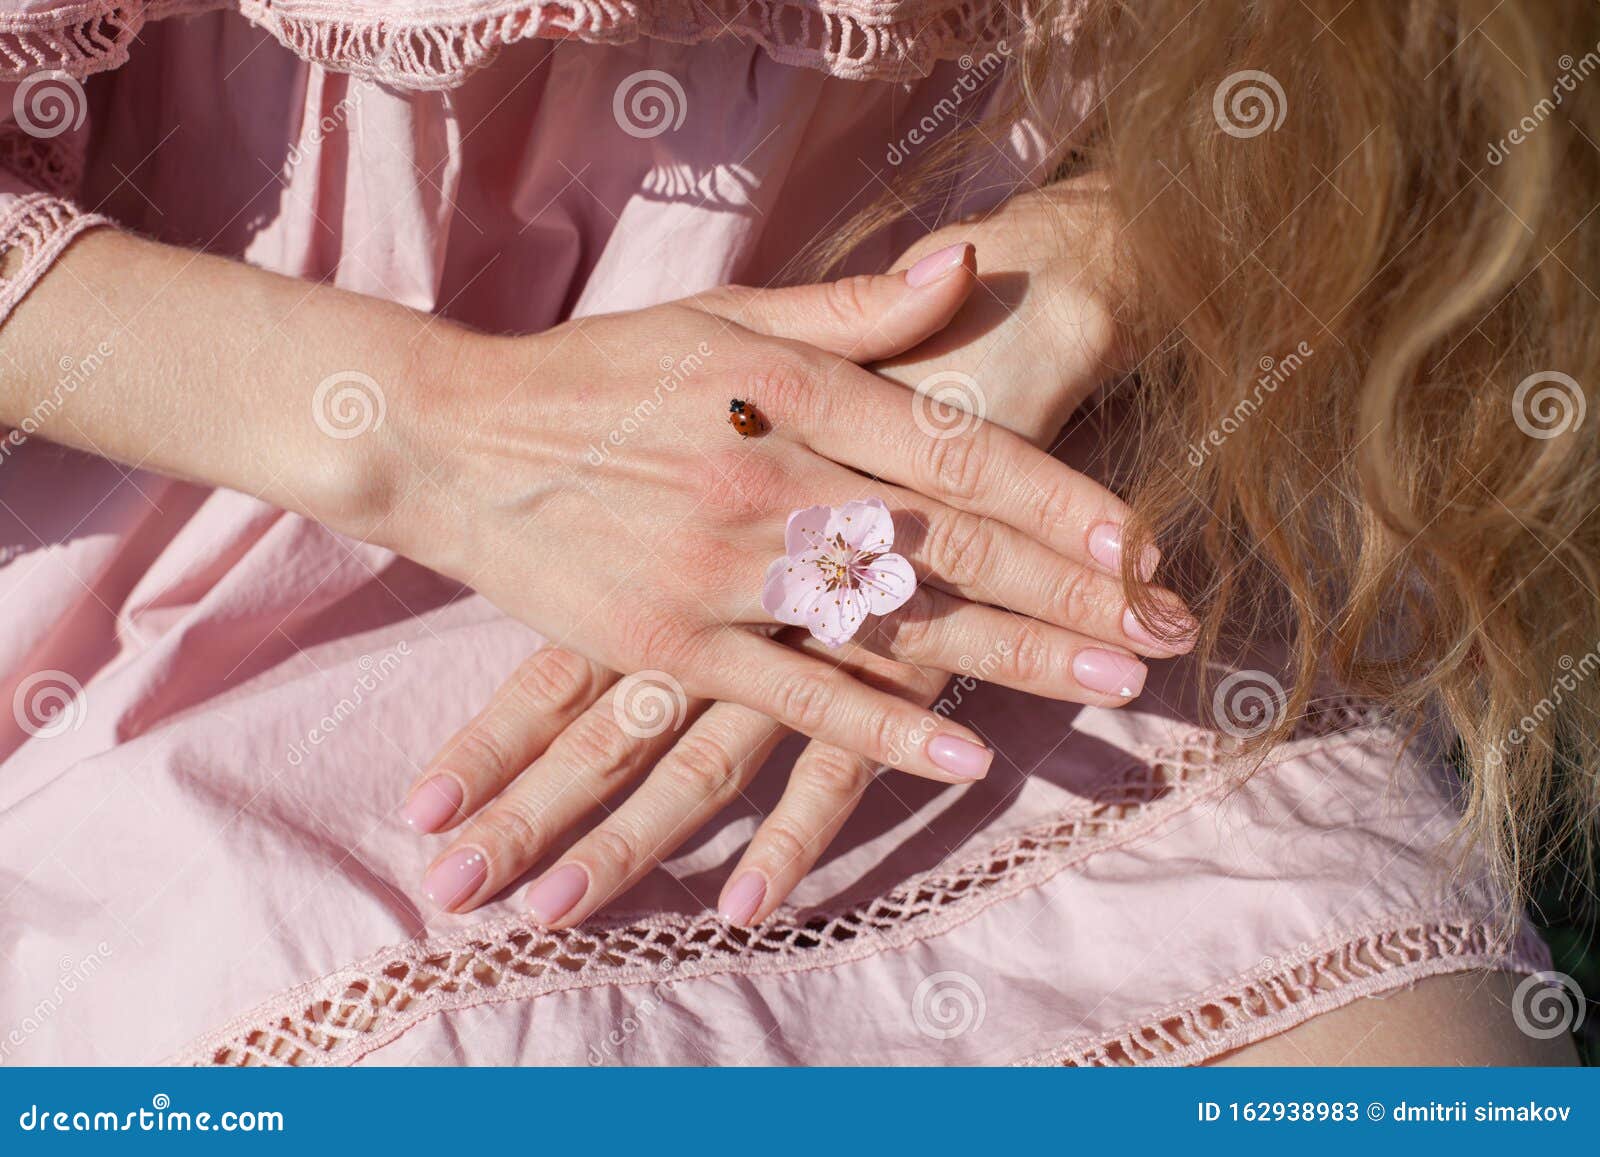 Insect Ladybug On A Blonde Woman`s Hand Stock Image Image Of Daylight Cartoon 162938983 